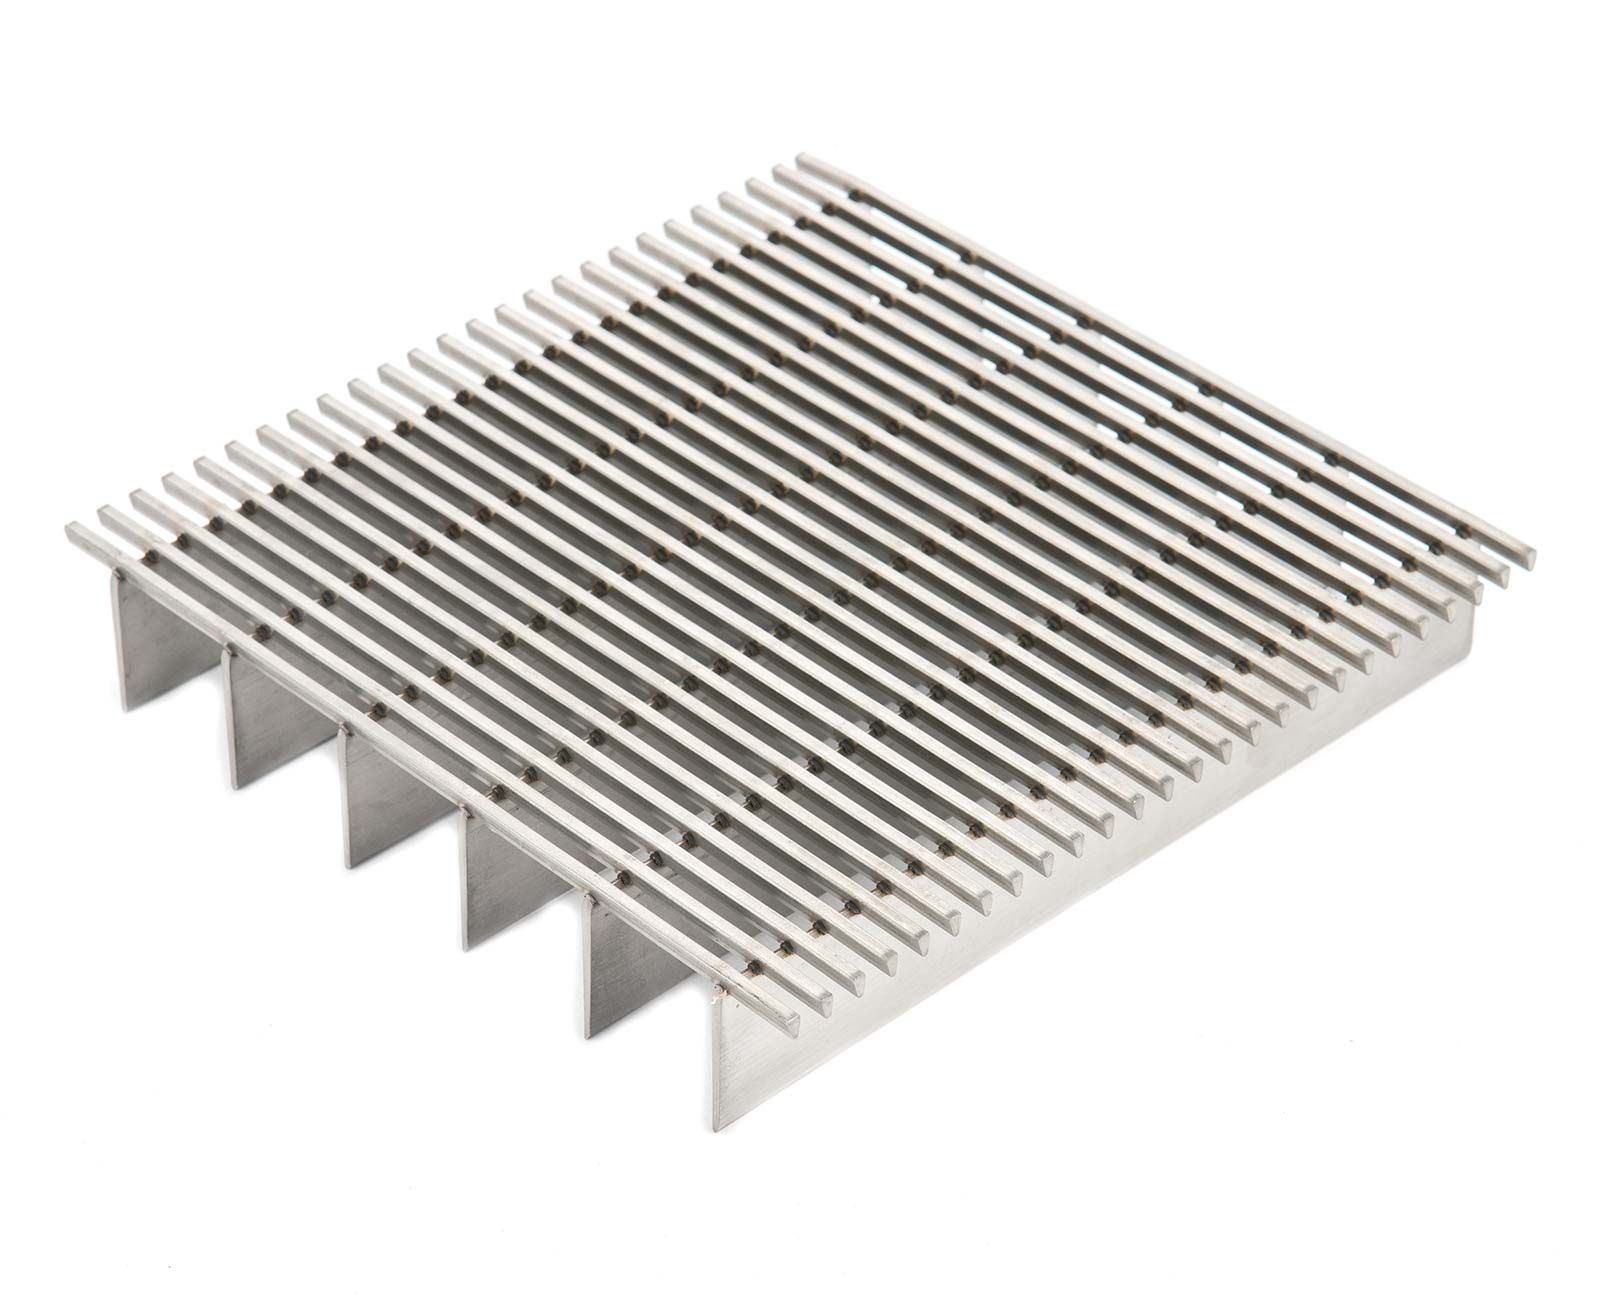 https://amarcoproducts.com/_media/products/st-98-stainless-steel-grating/images/st-98g-stainless-steel-entrance-grid-main.jpg